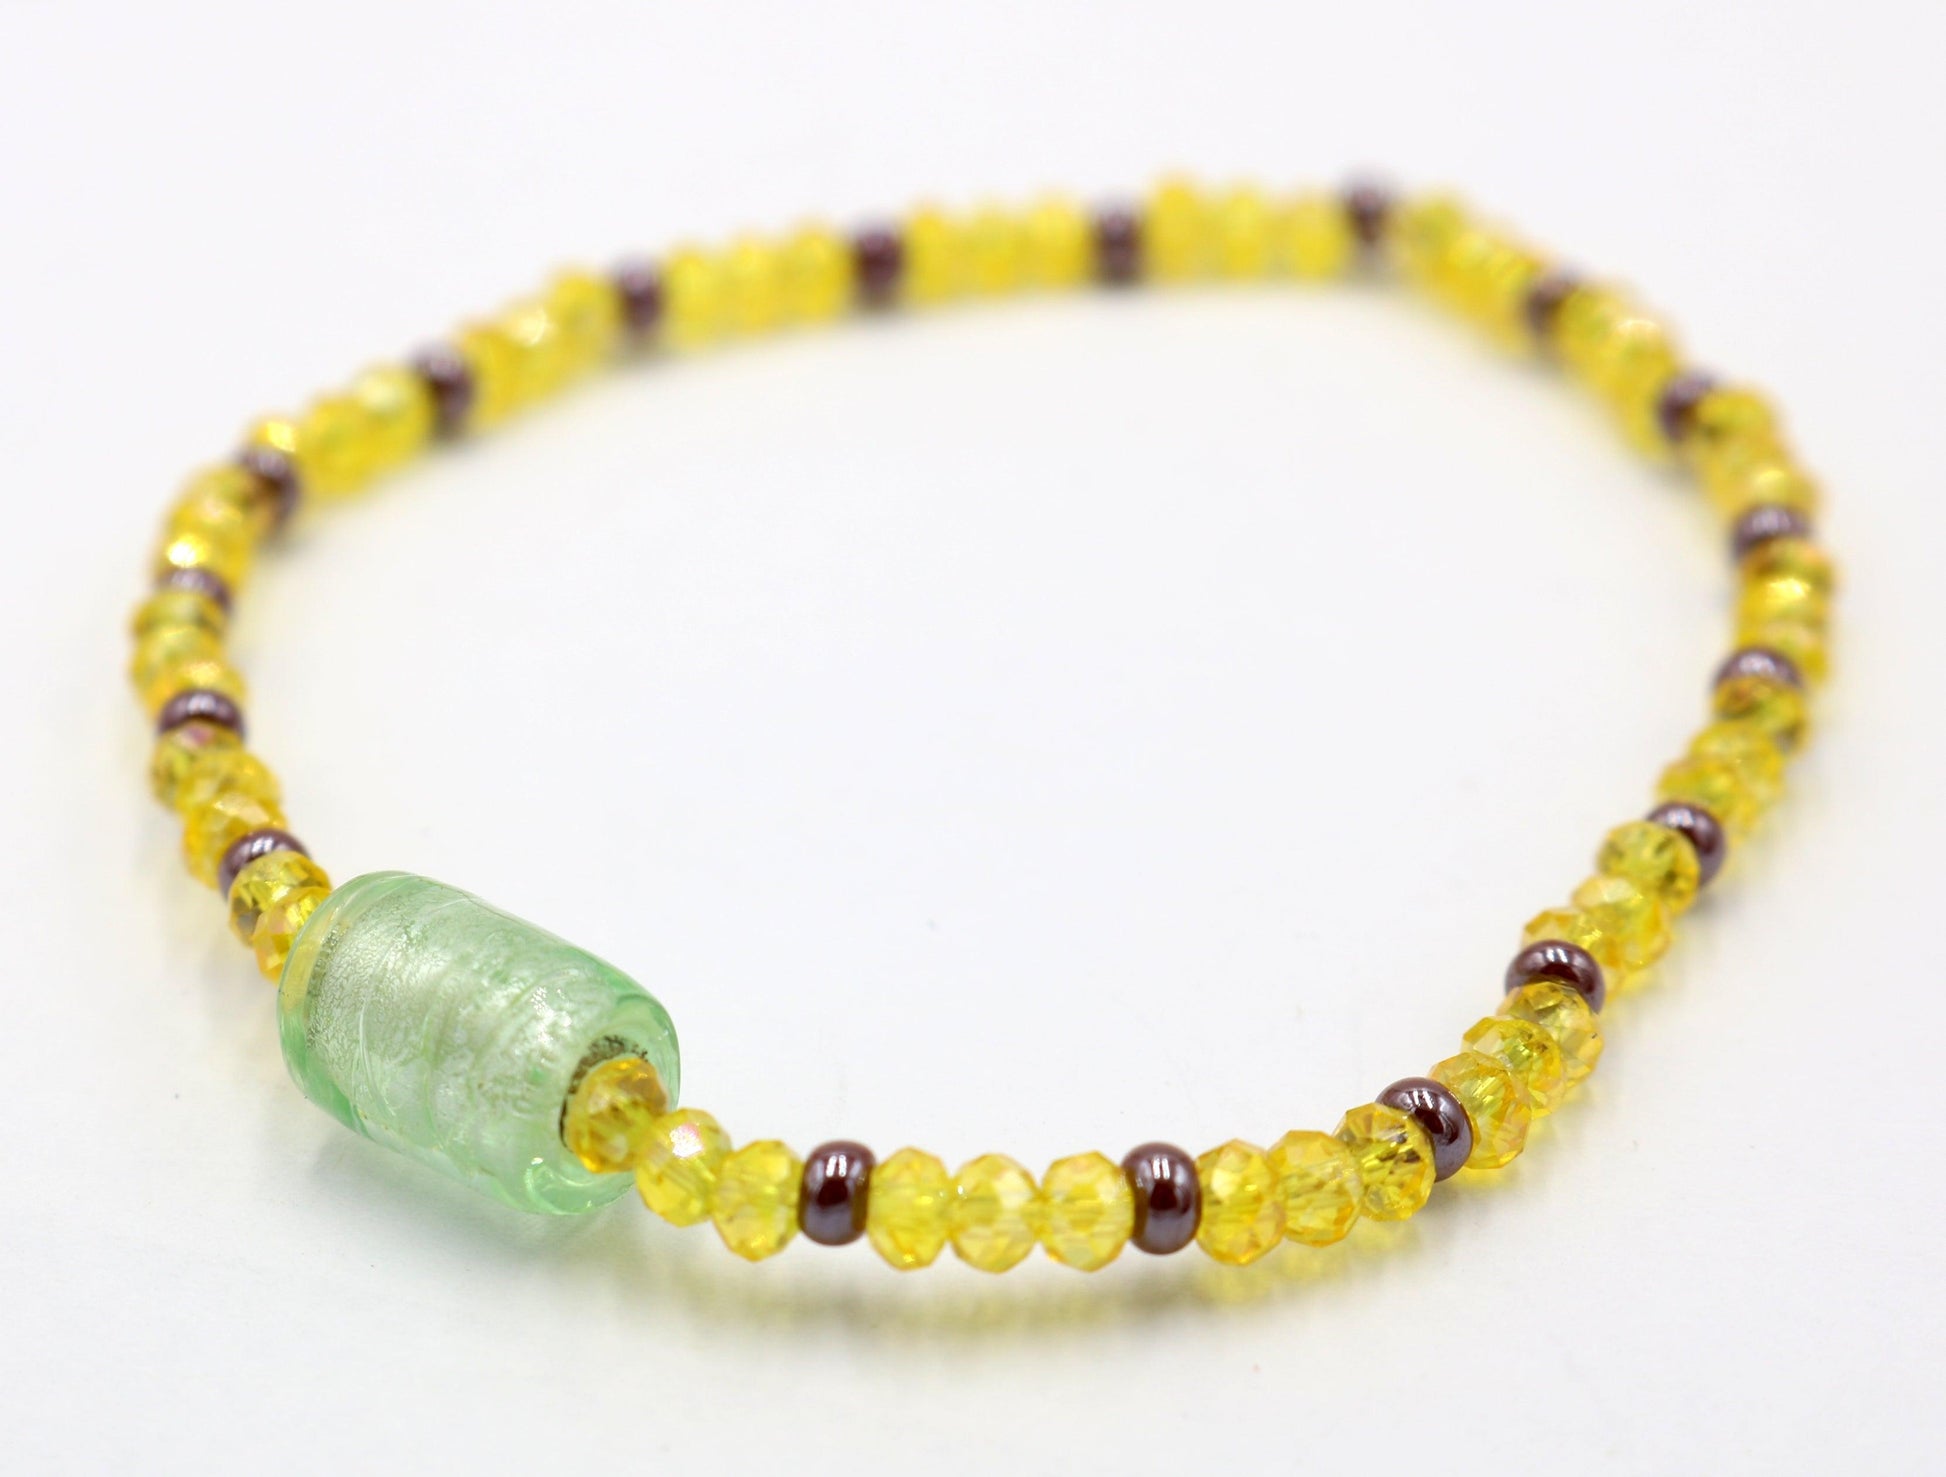 Frosty Light Mint Green Faceted Yellow Glass Beads with Brown Seed Glass Seed Bead Fun Boho Stretch Stack Bracelet Women’s Gift 2022 - Monkeysmojo